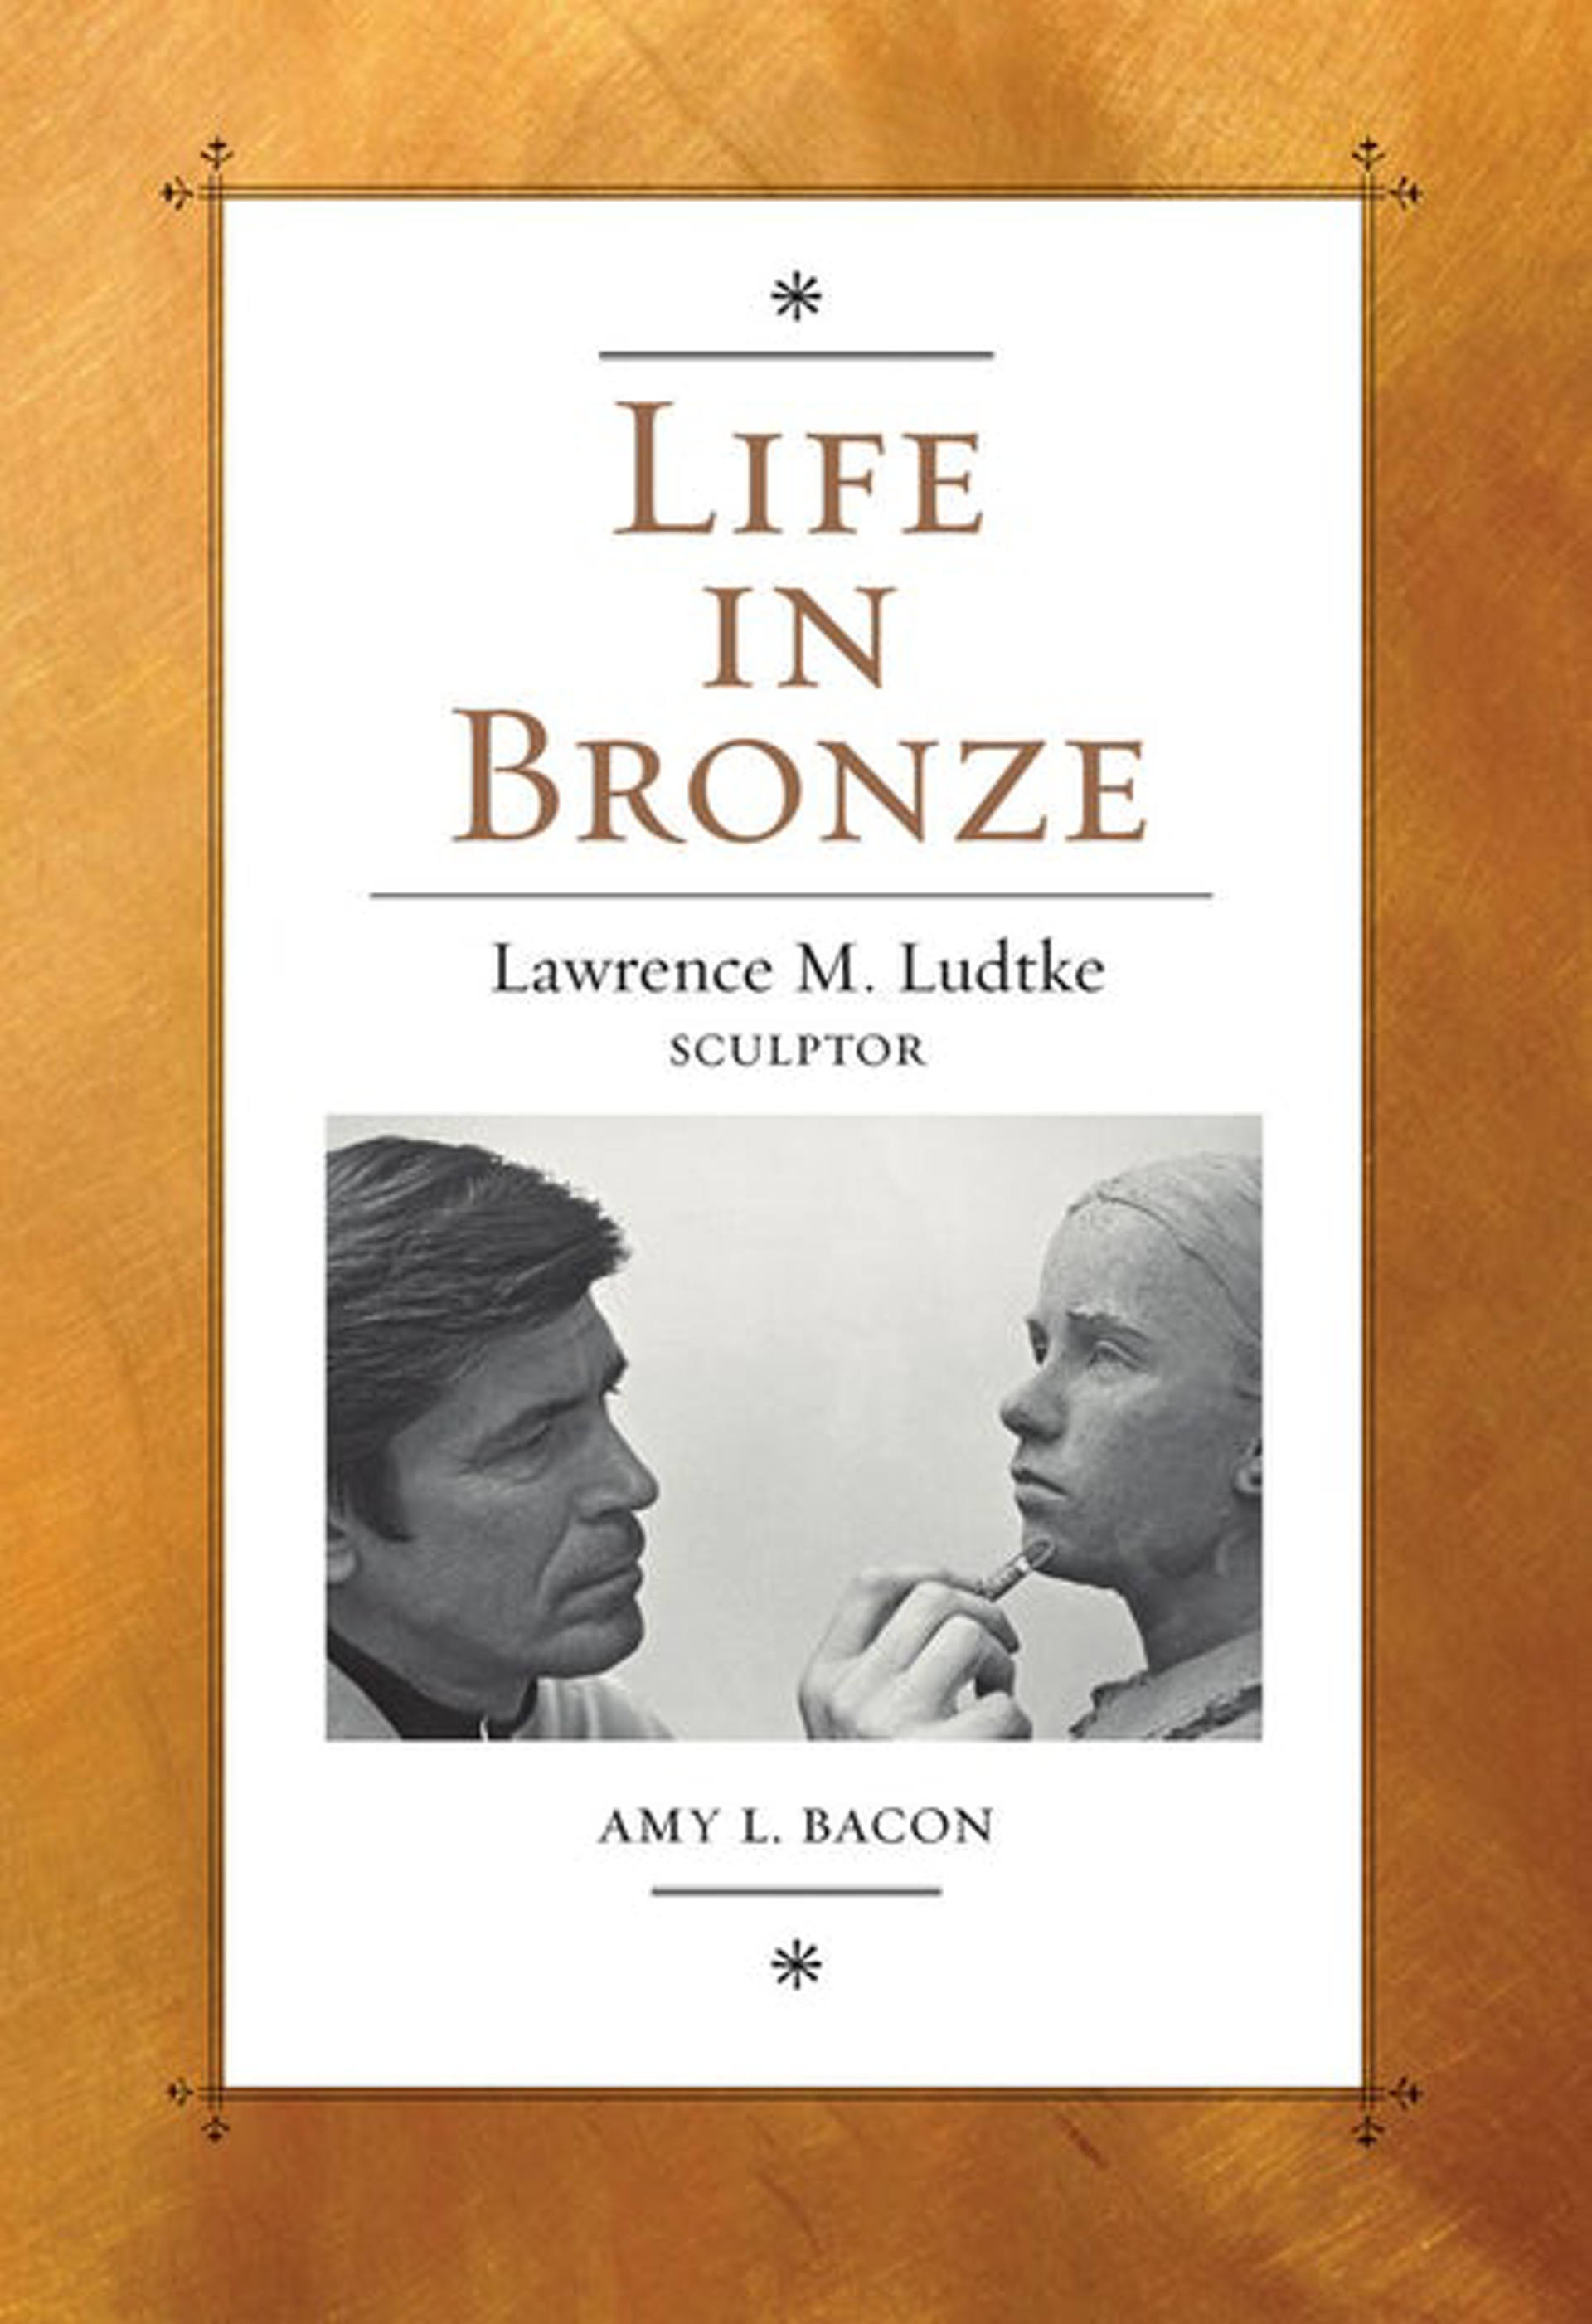 Life in Bronze | Lawrence M. Ludtke, Sculptor by Publications